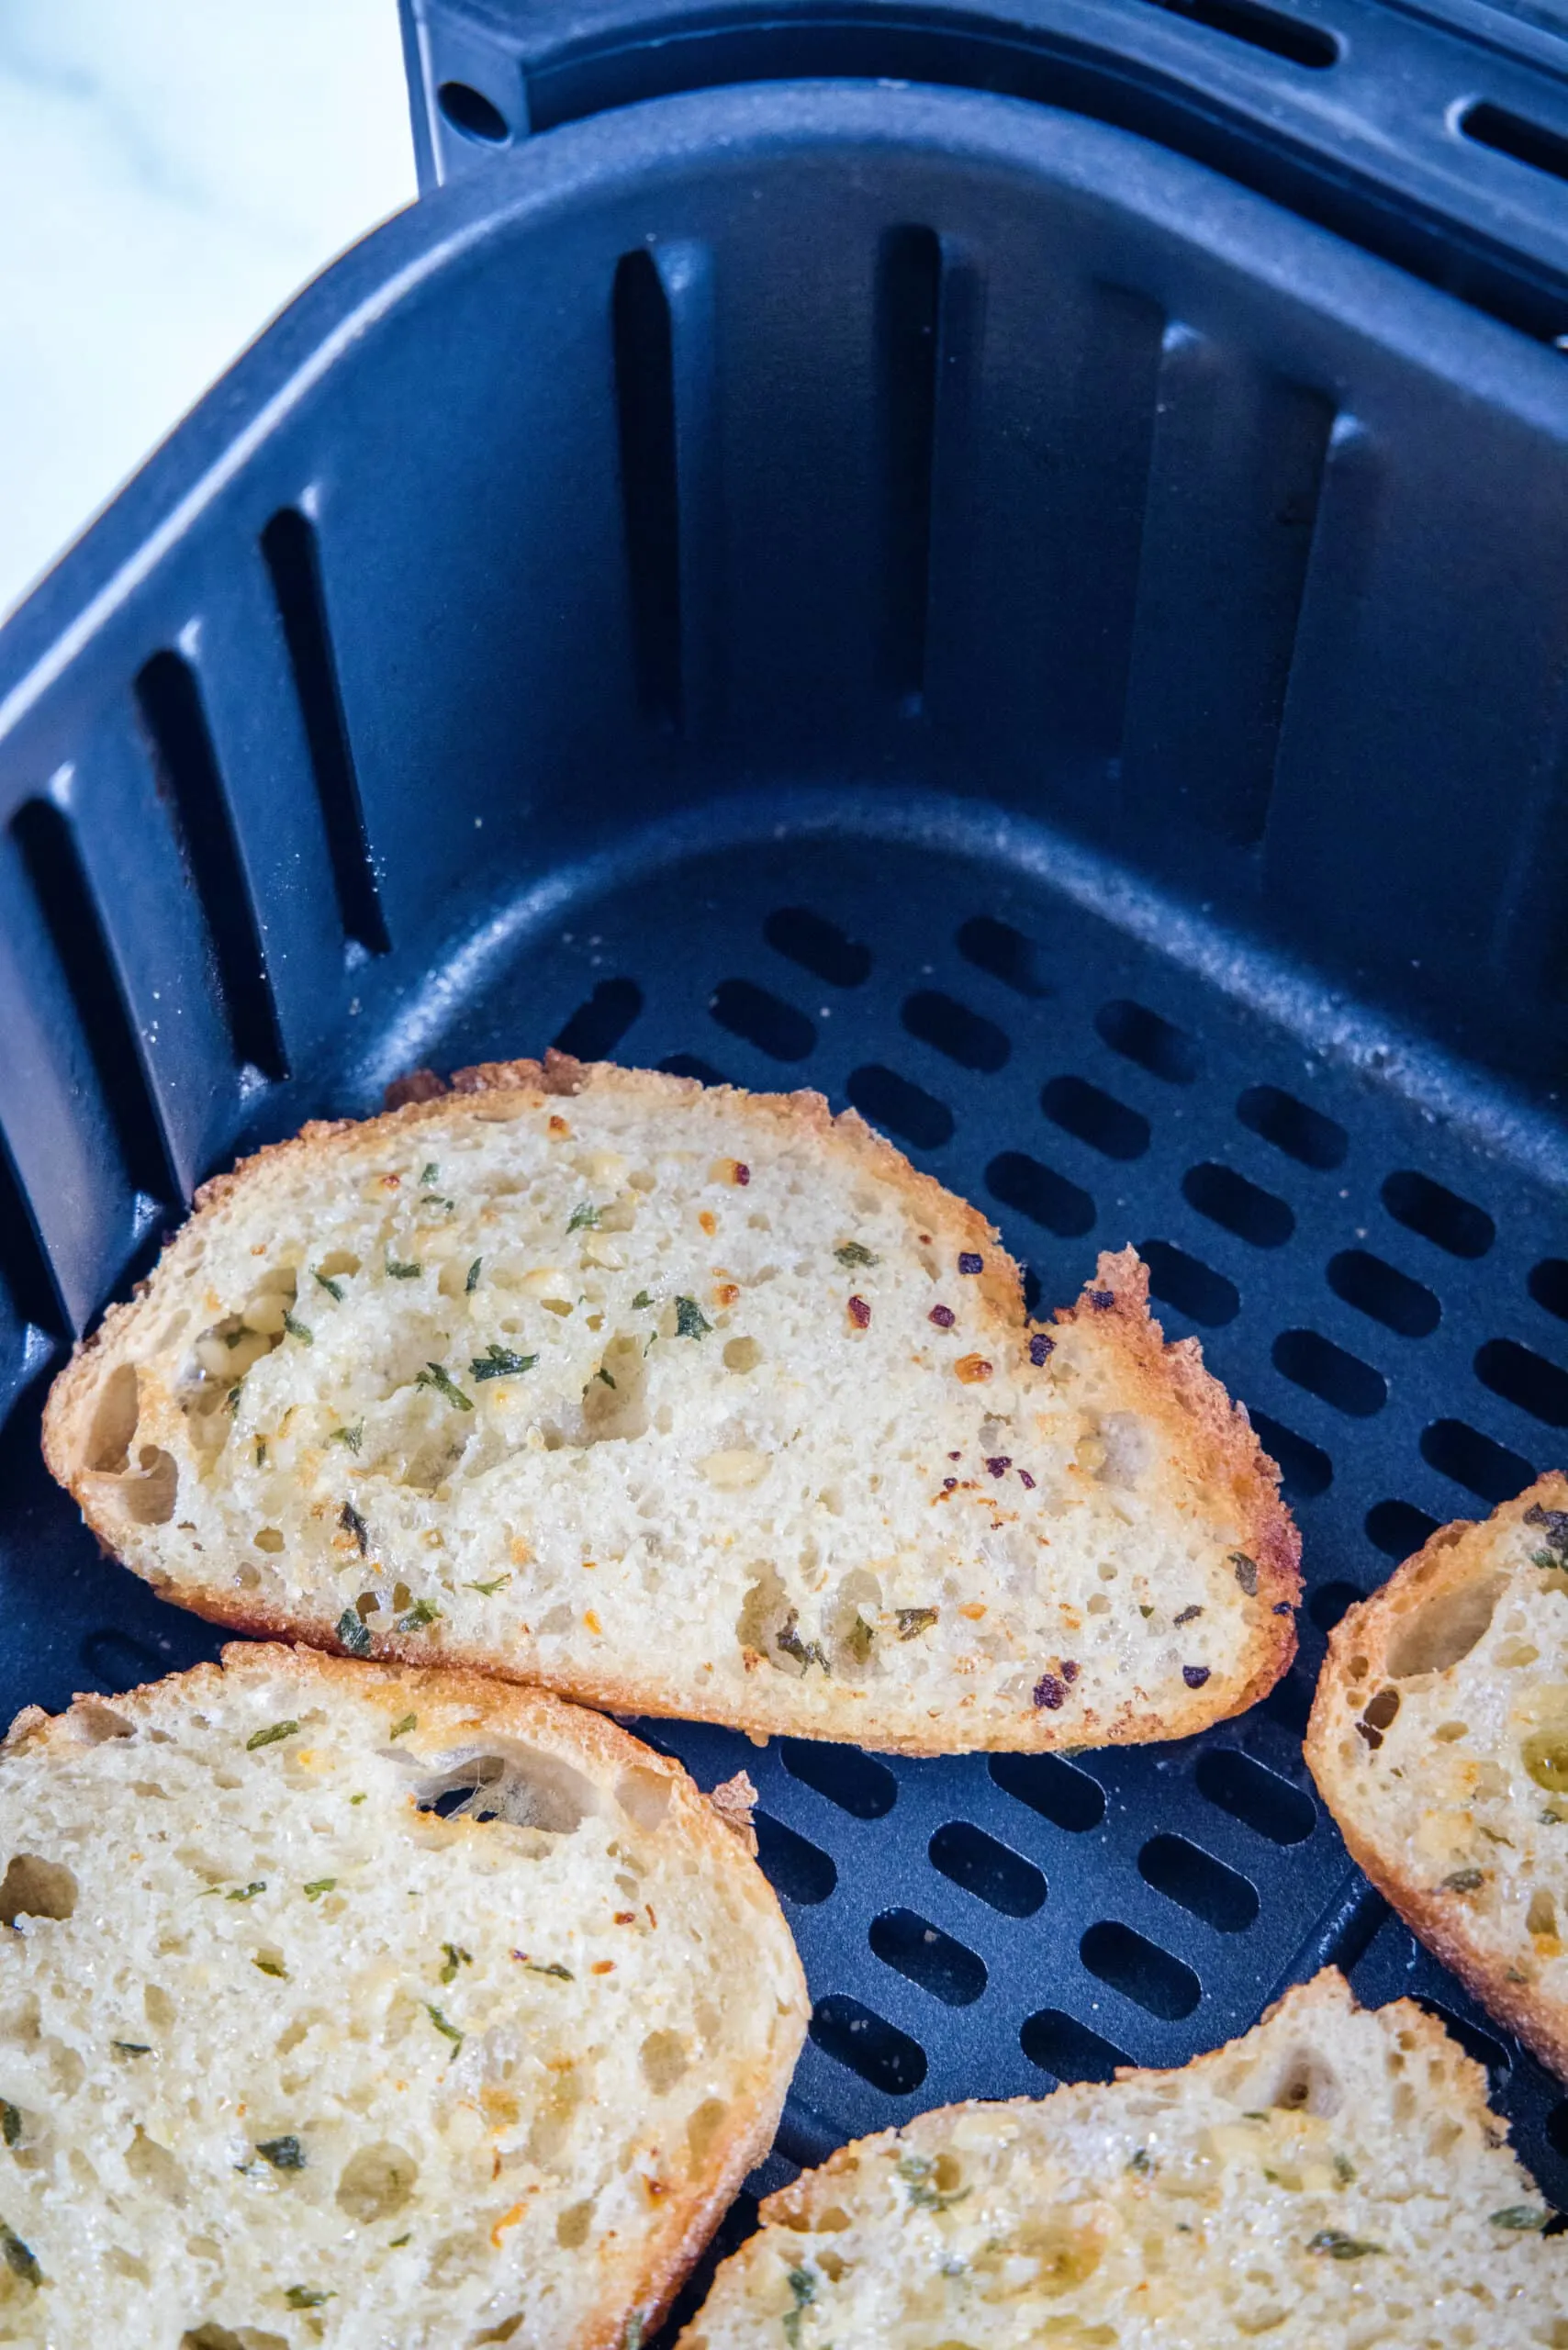 garlic bread cooked in air fryer